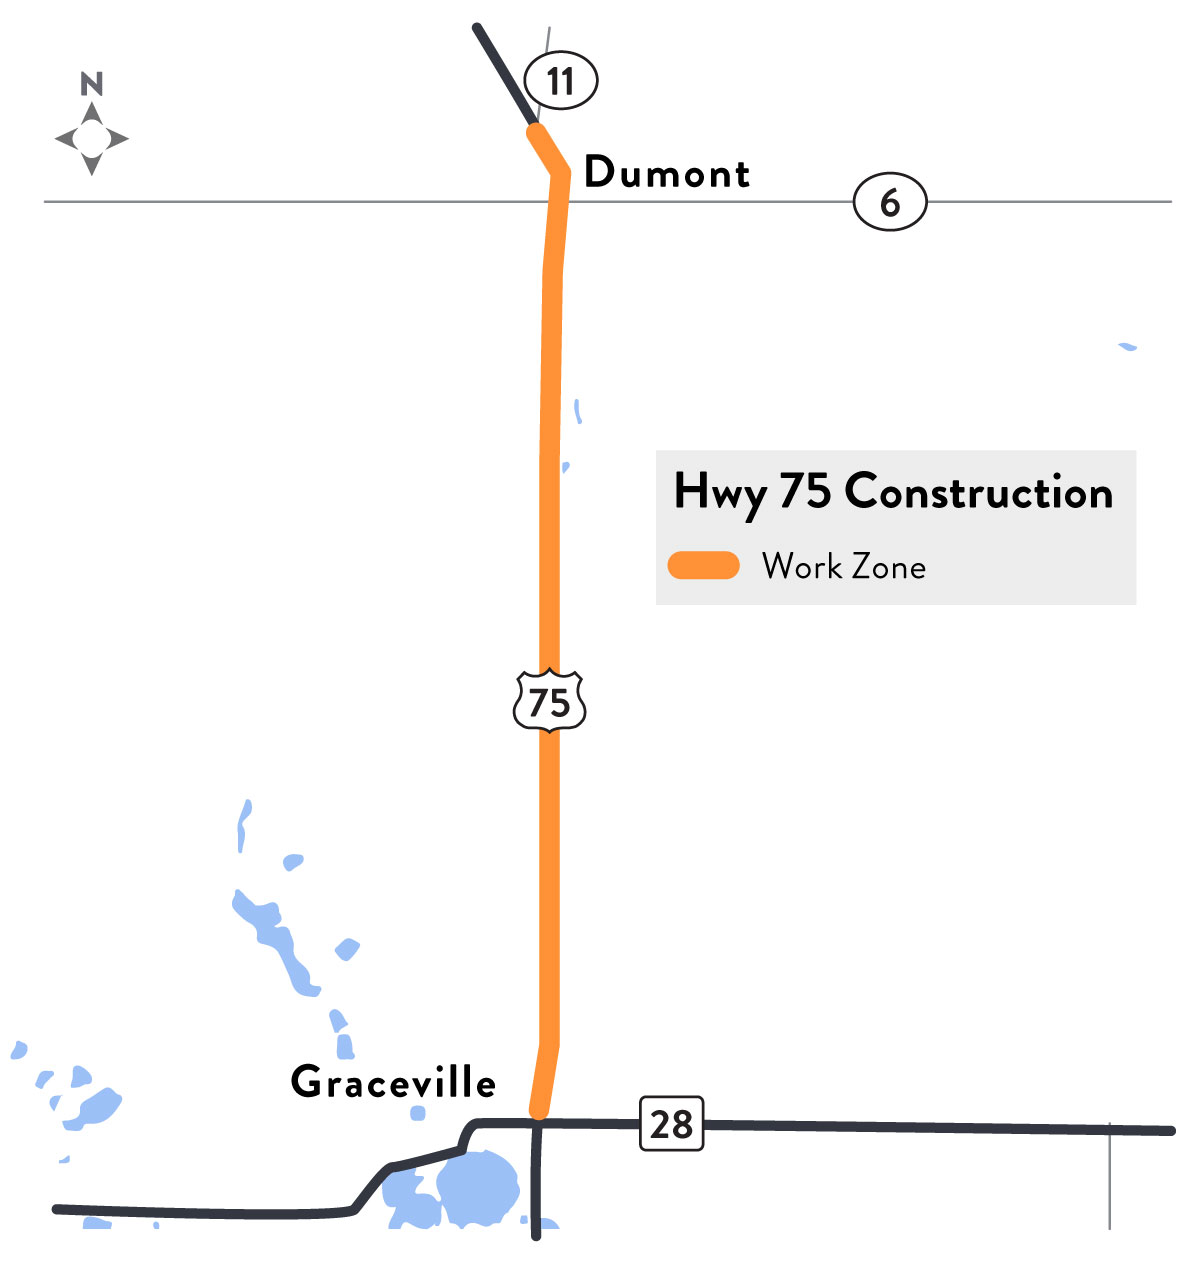 Map of Hwy 75 work zone from Graceville to Dumont